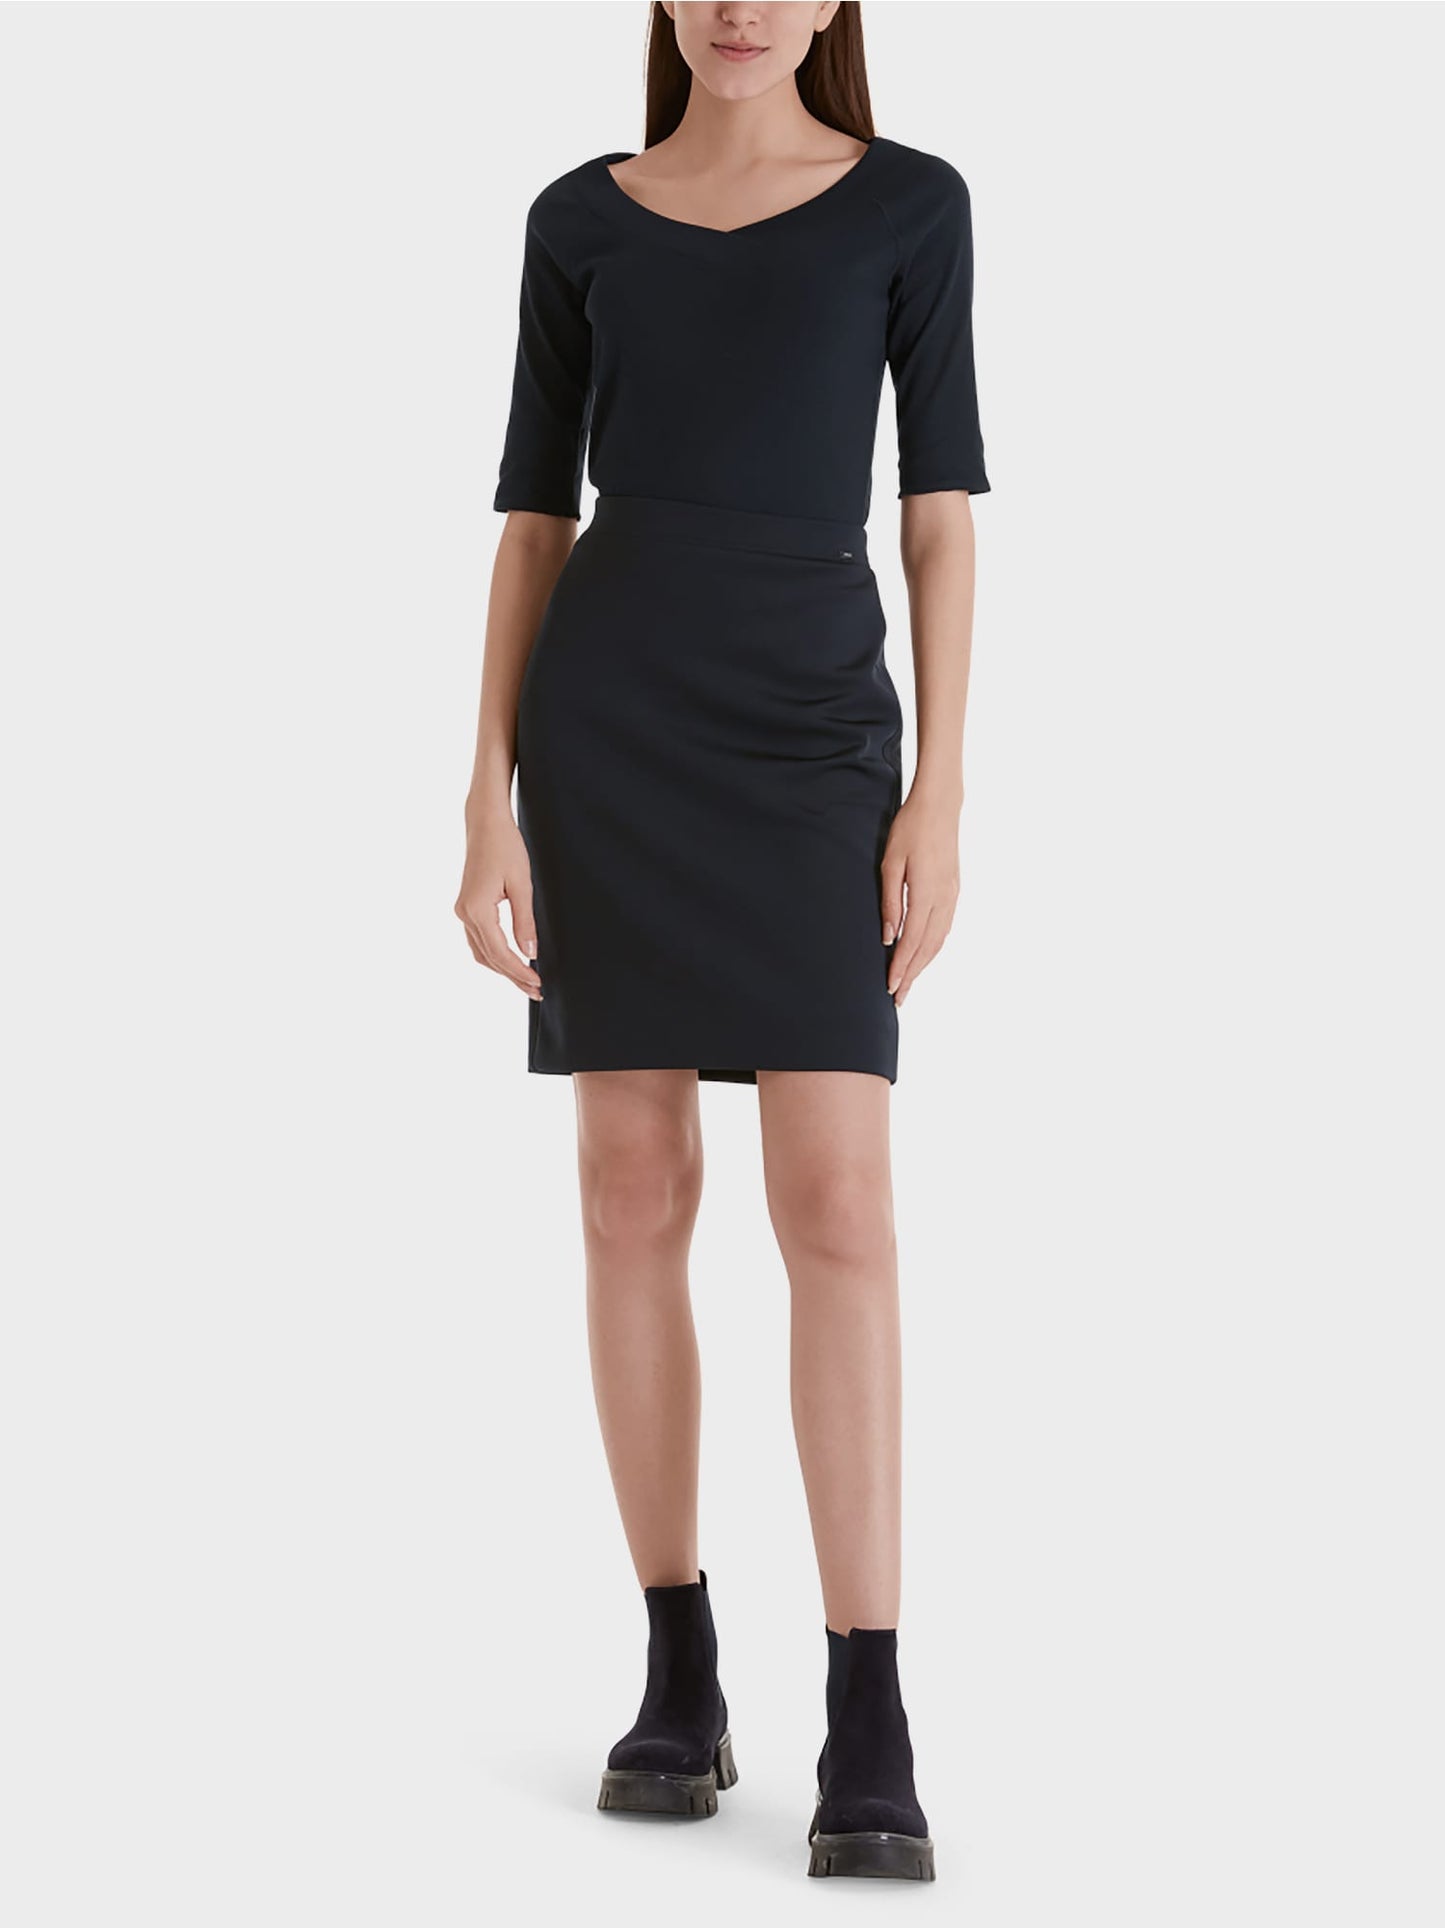 Marc Cain Stretch Jersey Skirt in Midnight Navy